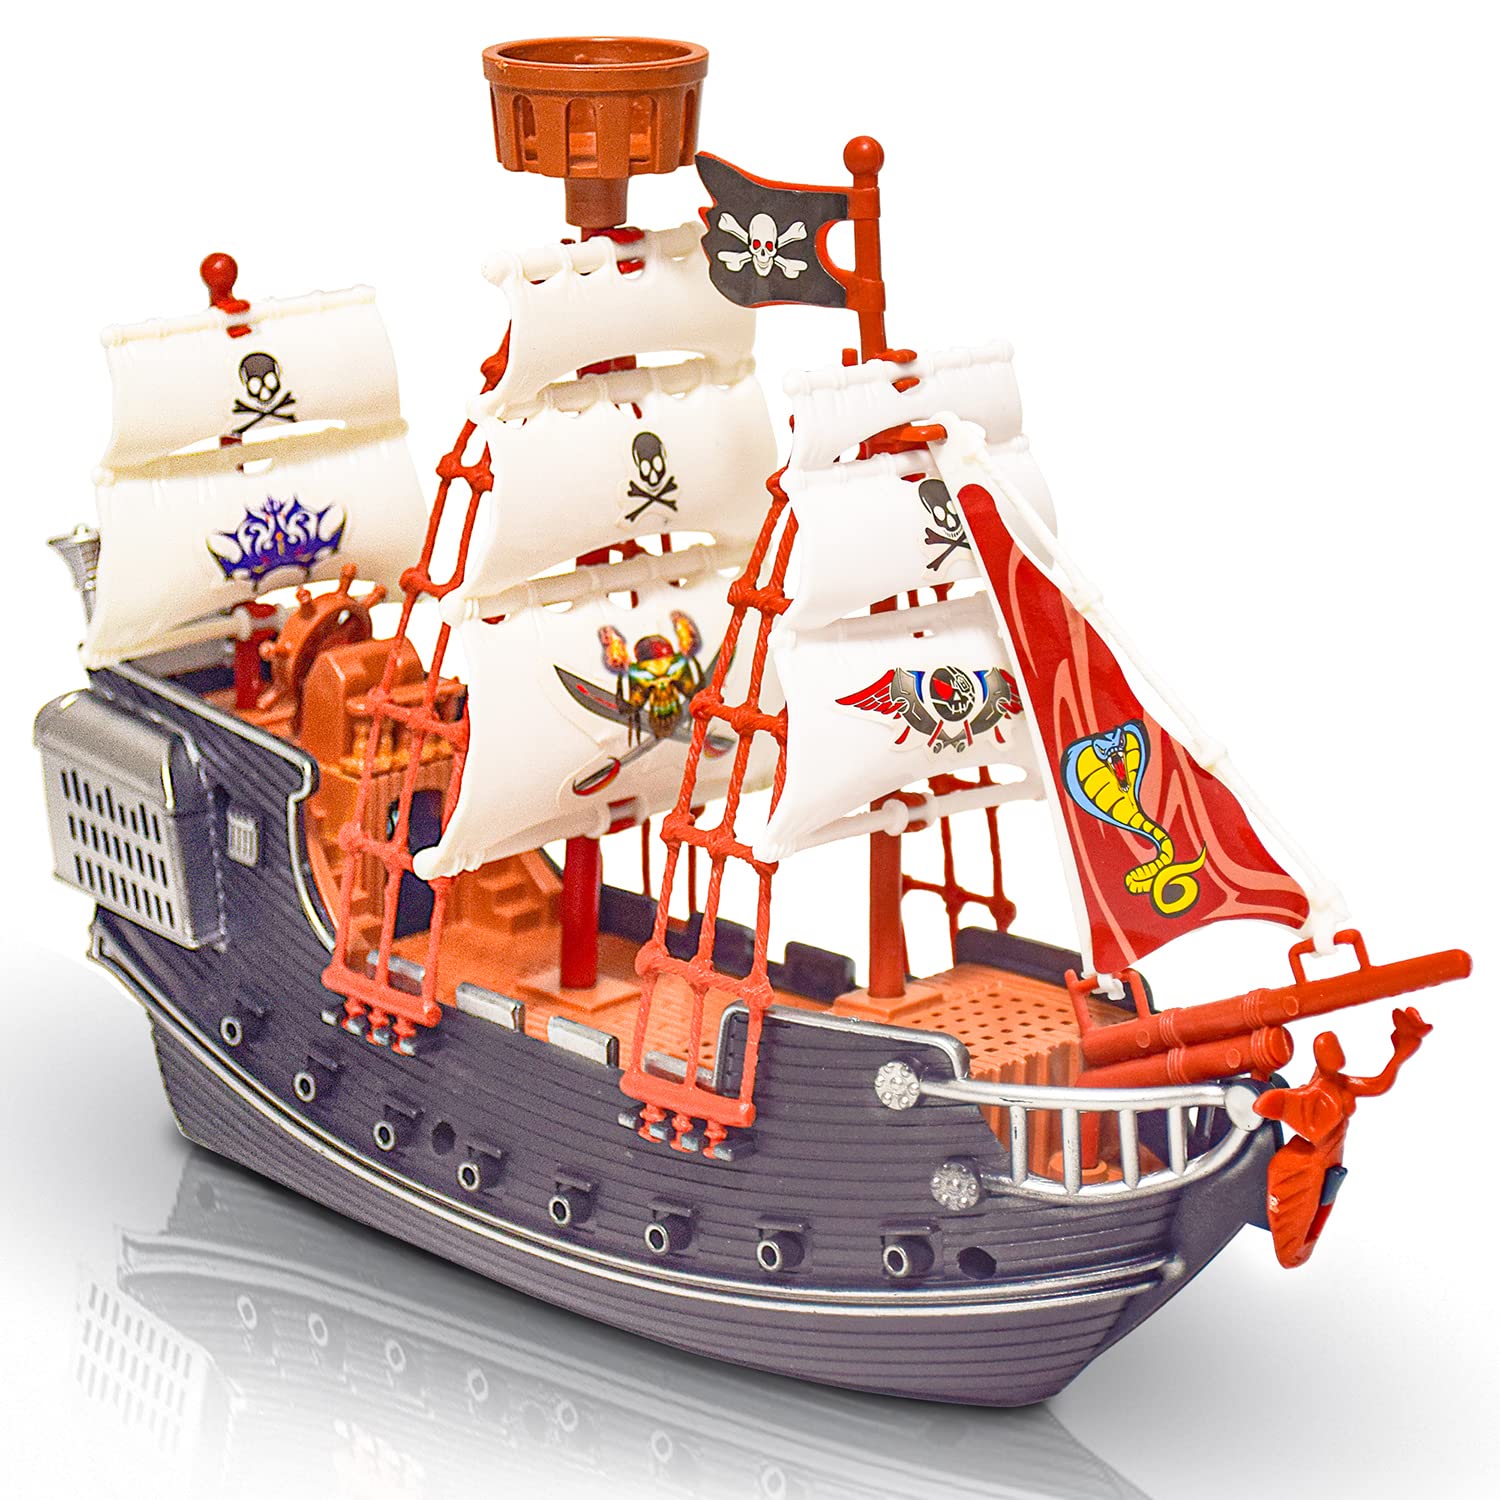 ArtCreativity 10 Inch Pirate Boat, Detailed Pirate Ship Toy Playset with 2 Pirate Action Figures & Tree, Fun Pirate Party Favor and Prize, Best Gift for Boys & Girls Ages 3+